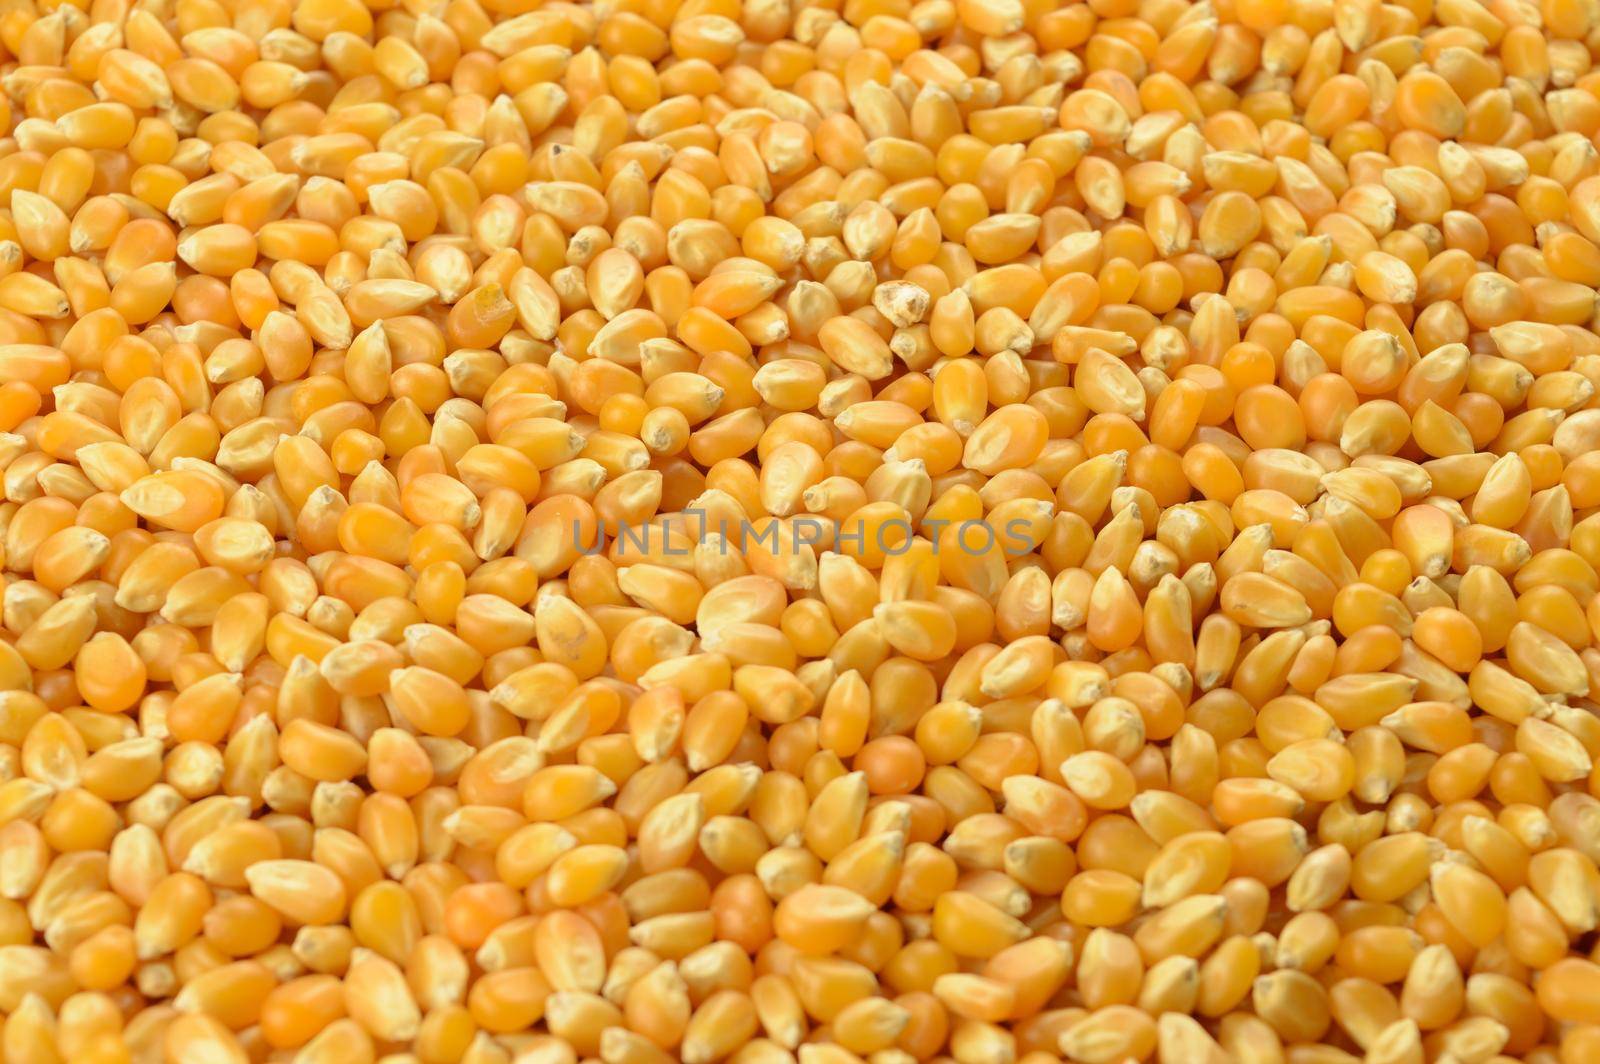 Whole Kernel Corn Background by AlphaBaby